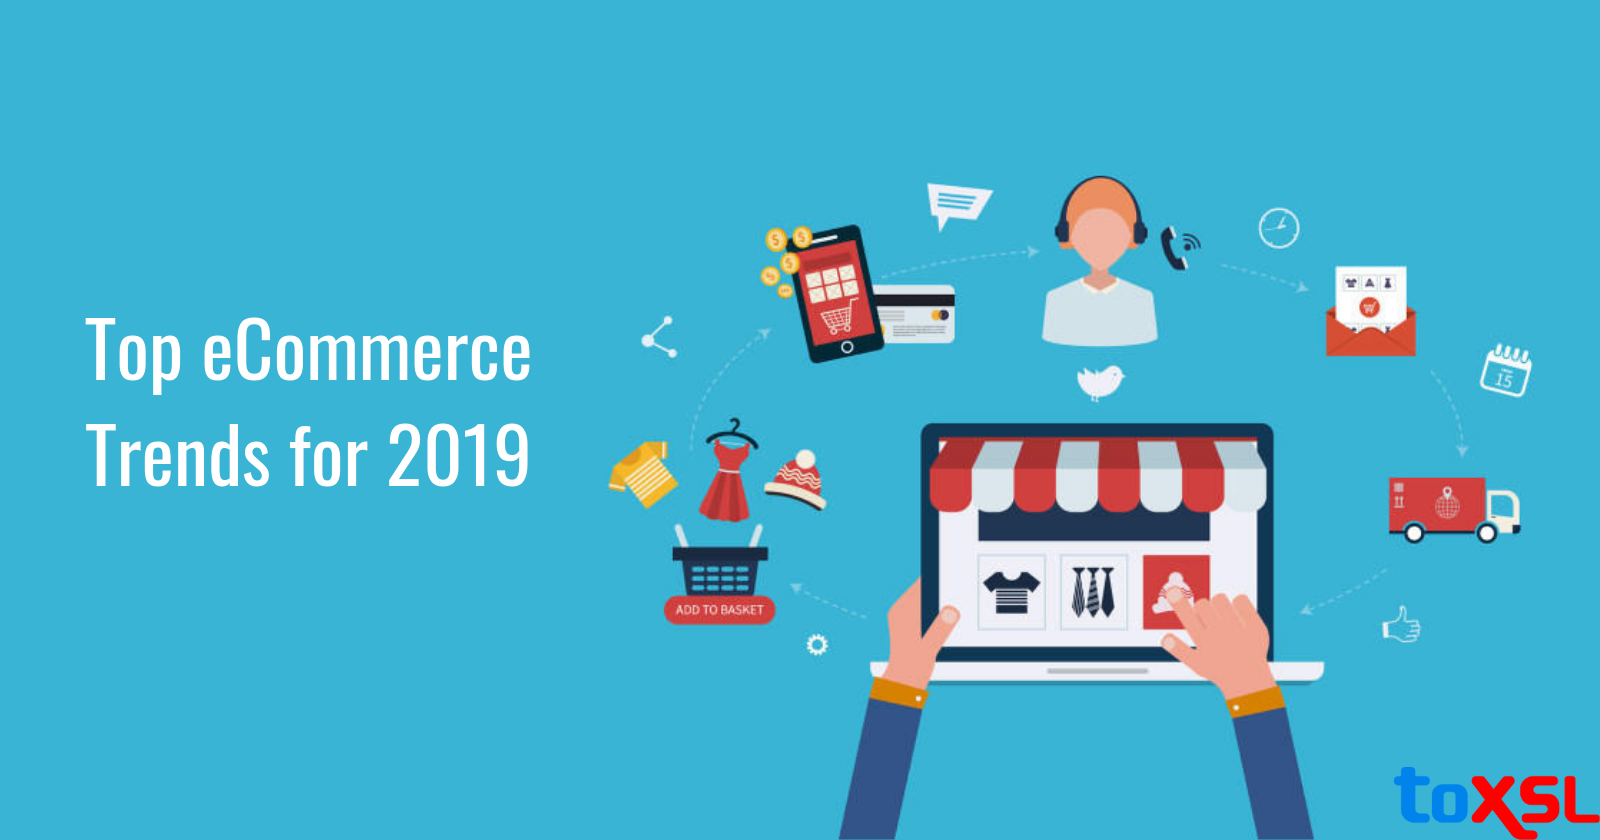 Expected Trends in the eCommerce Sector for 2019